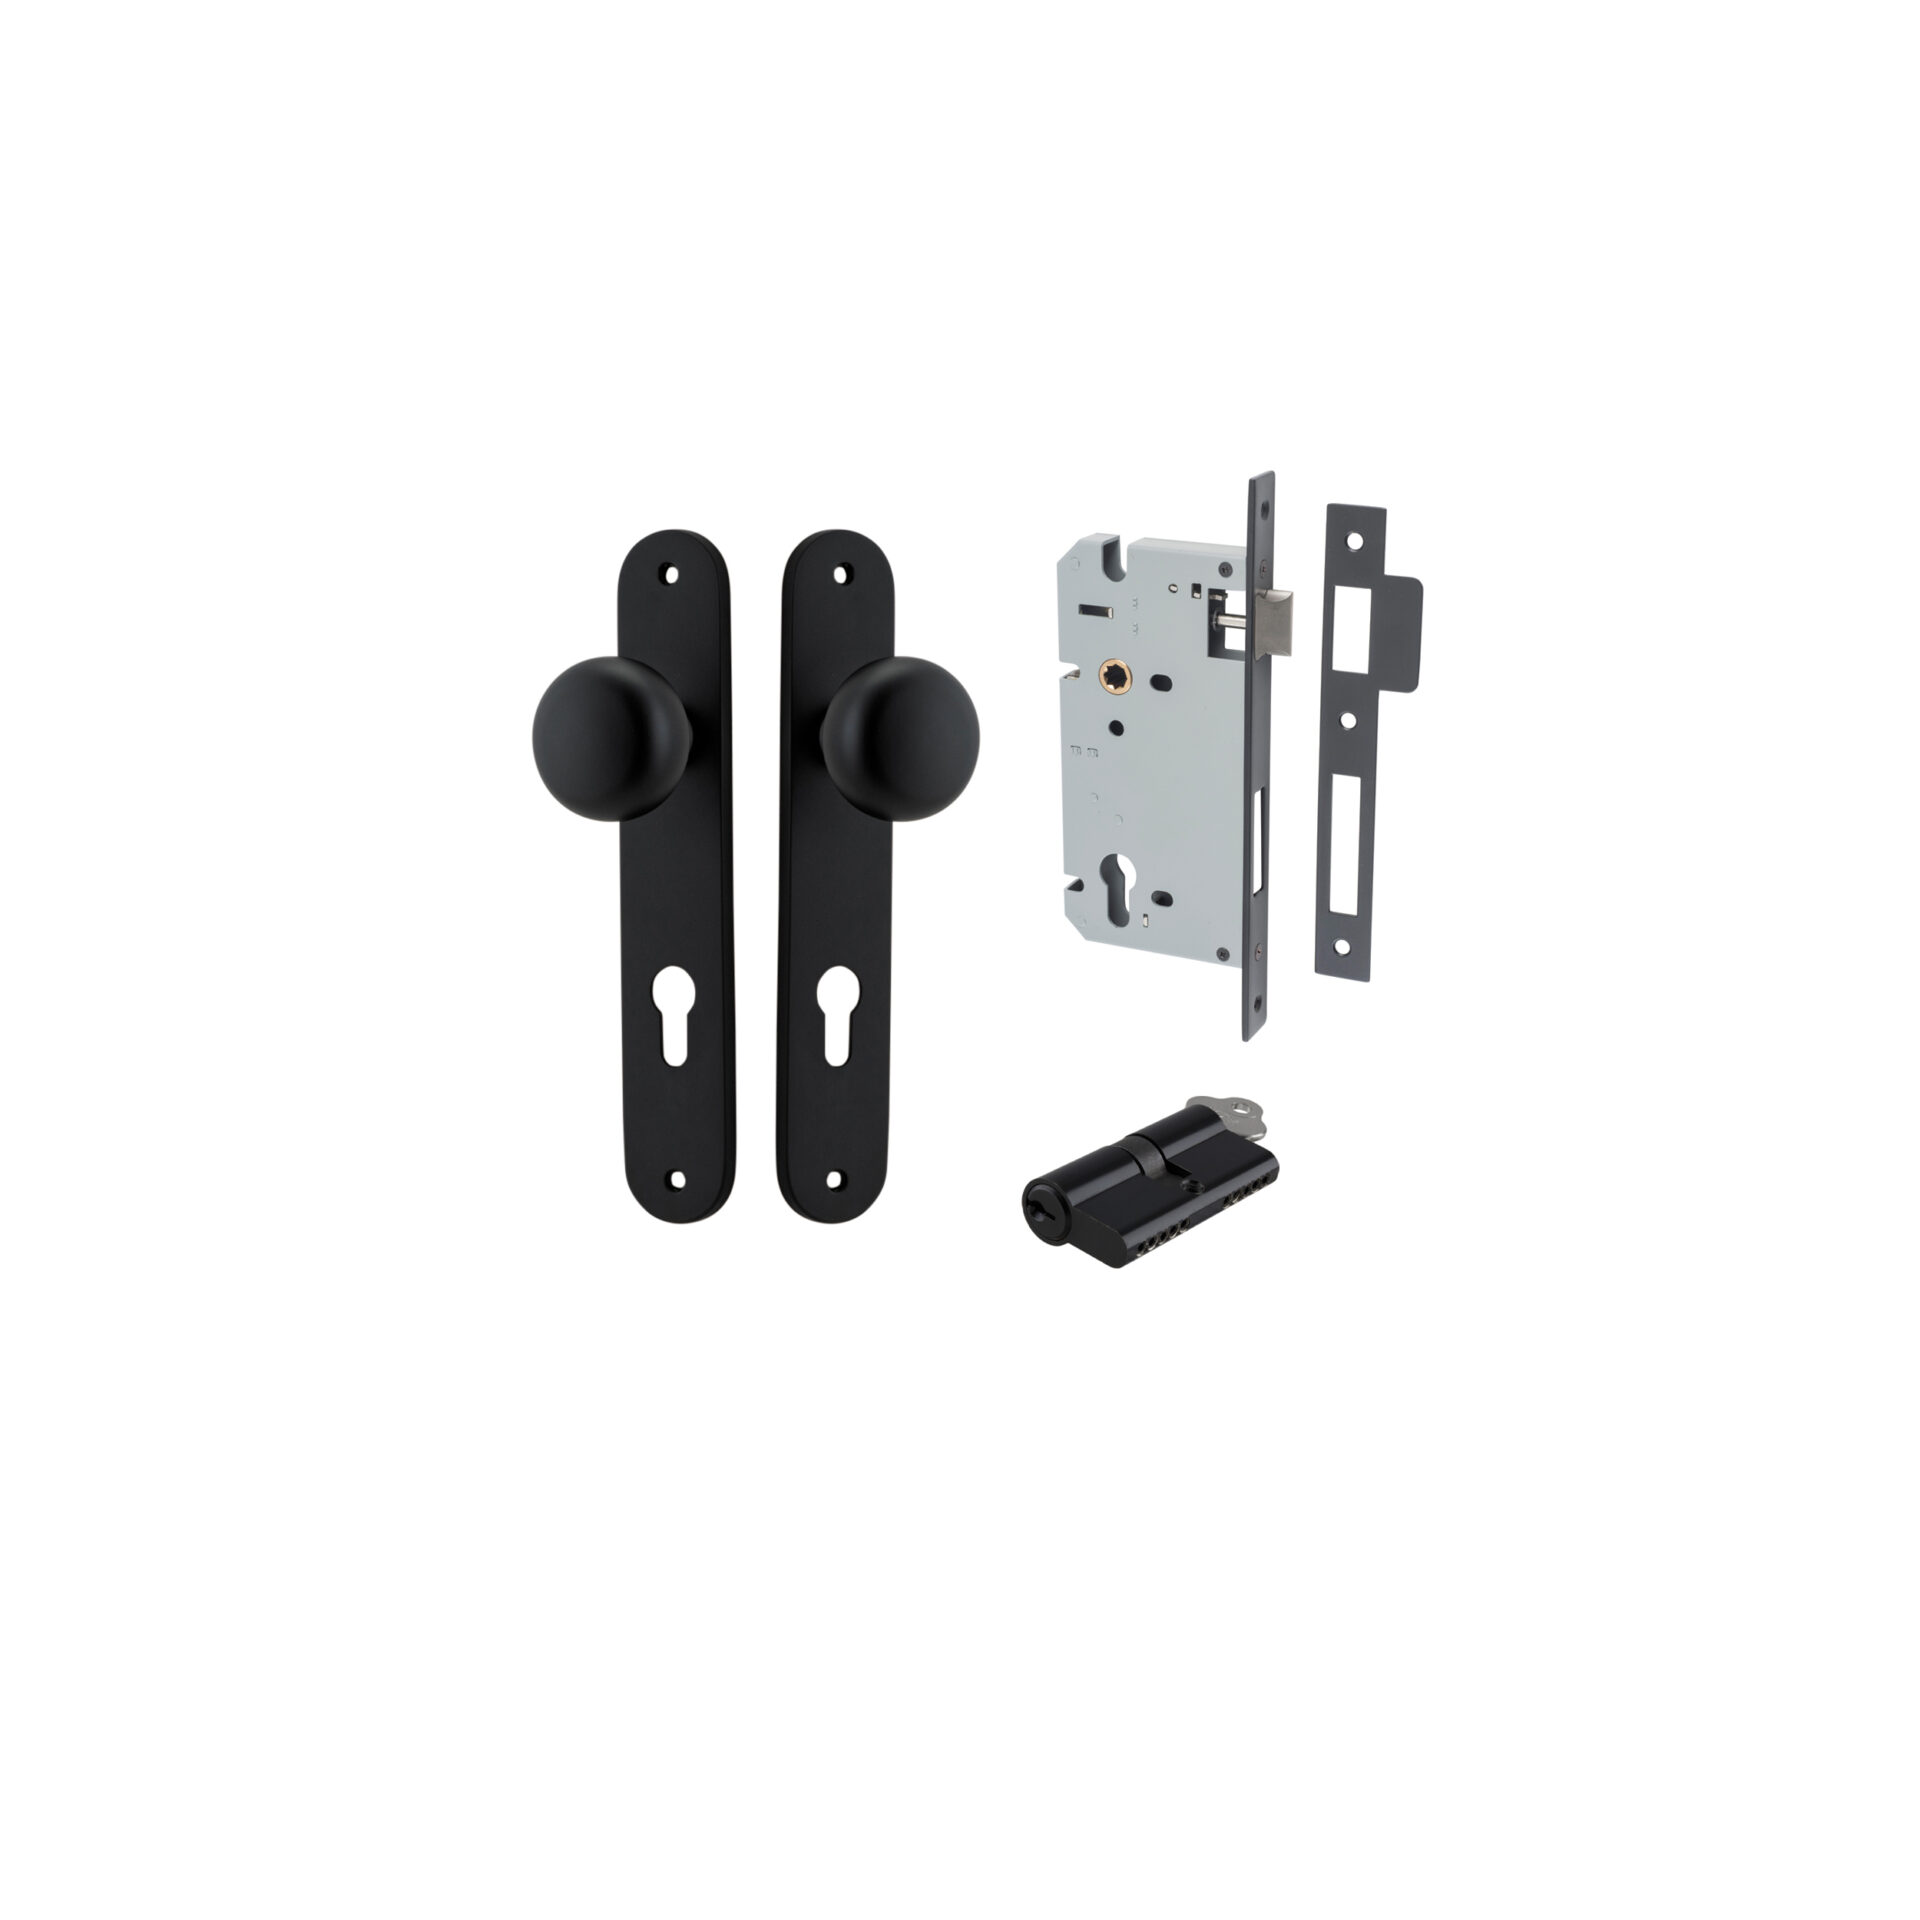 Cambridge Knob - Oval Backplate Entrance Kit with High Security Lock